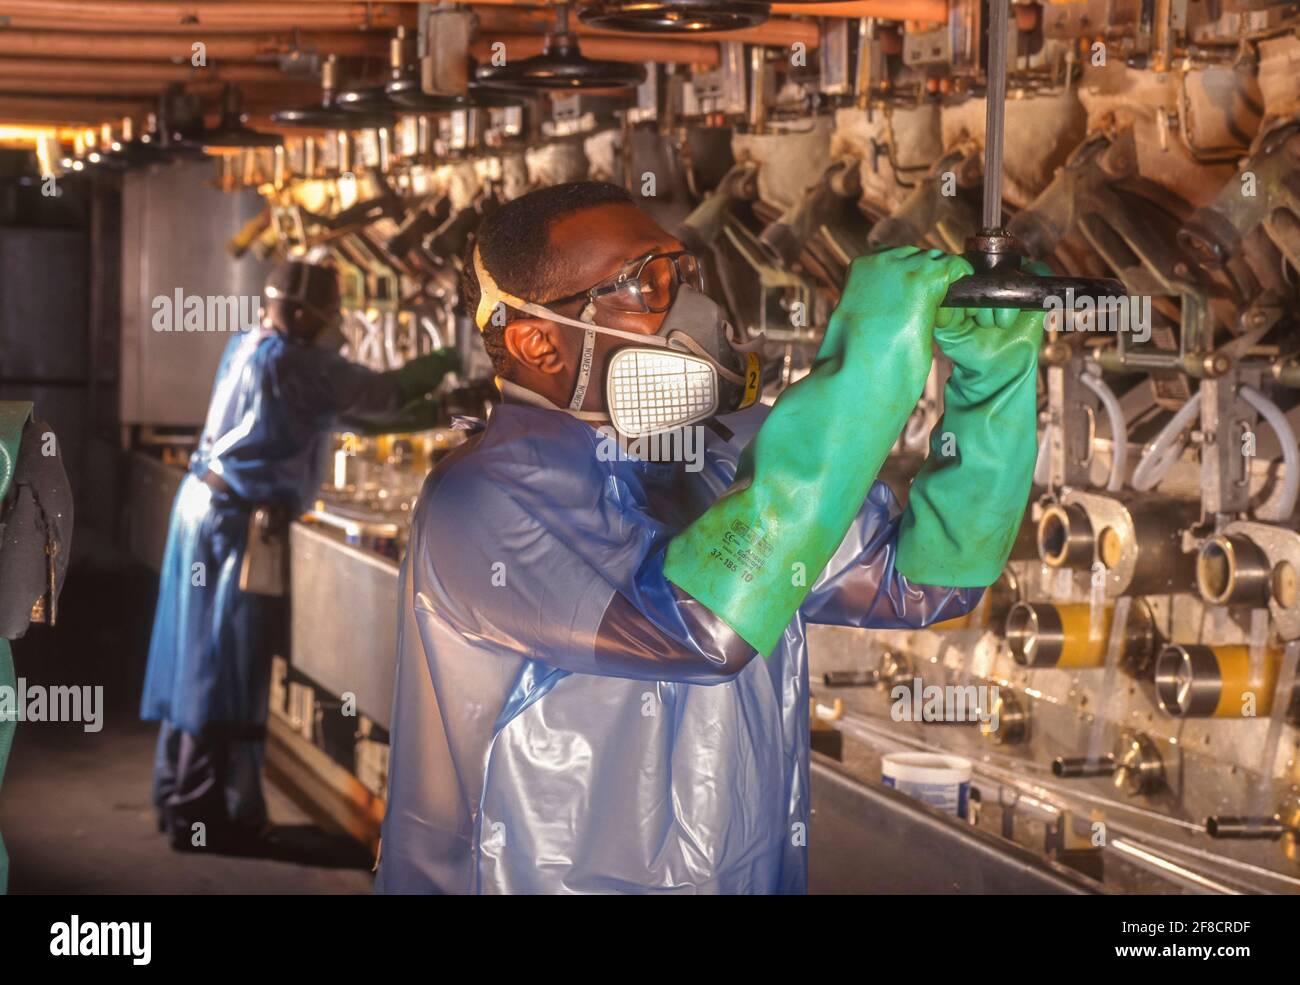 RICHMOND, VIRGINIA, USA, APRIL 16, 1998 - Worker wearing protective gear adjusts valve on Nomex machine in DuPont plant. Stock Photo